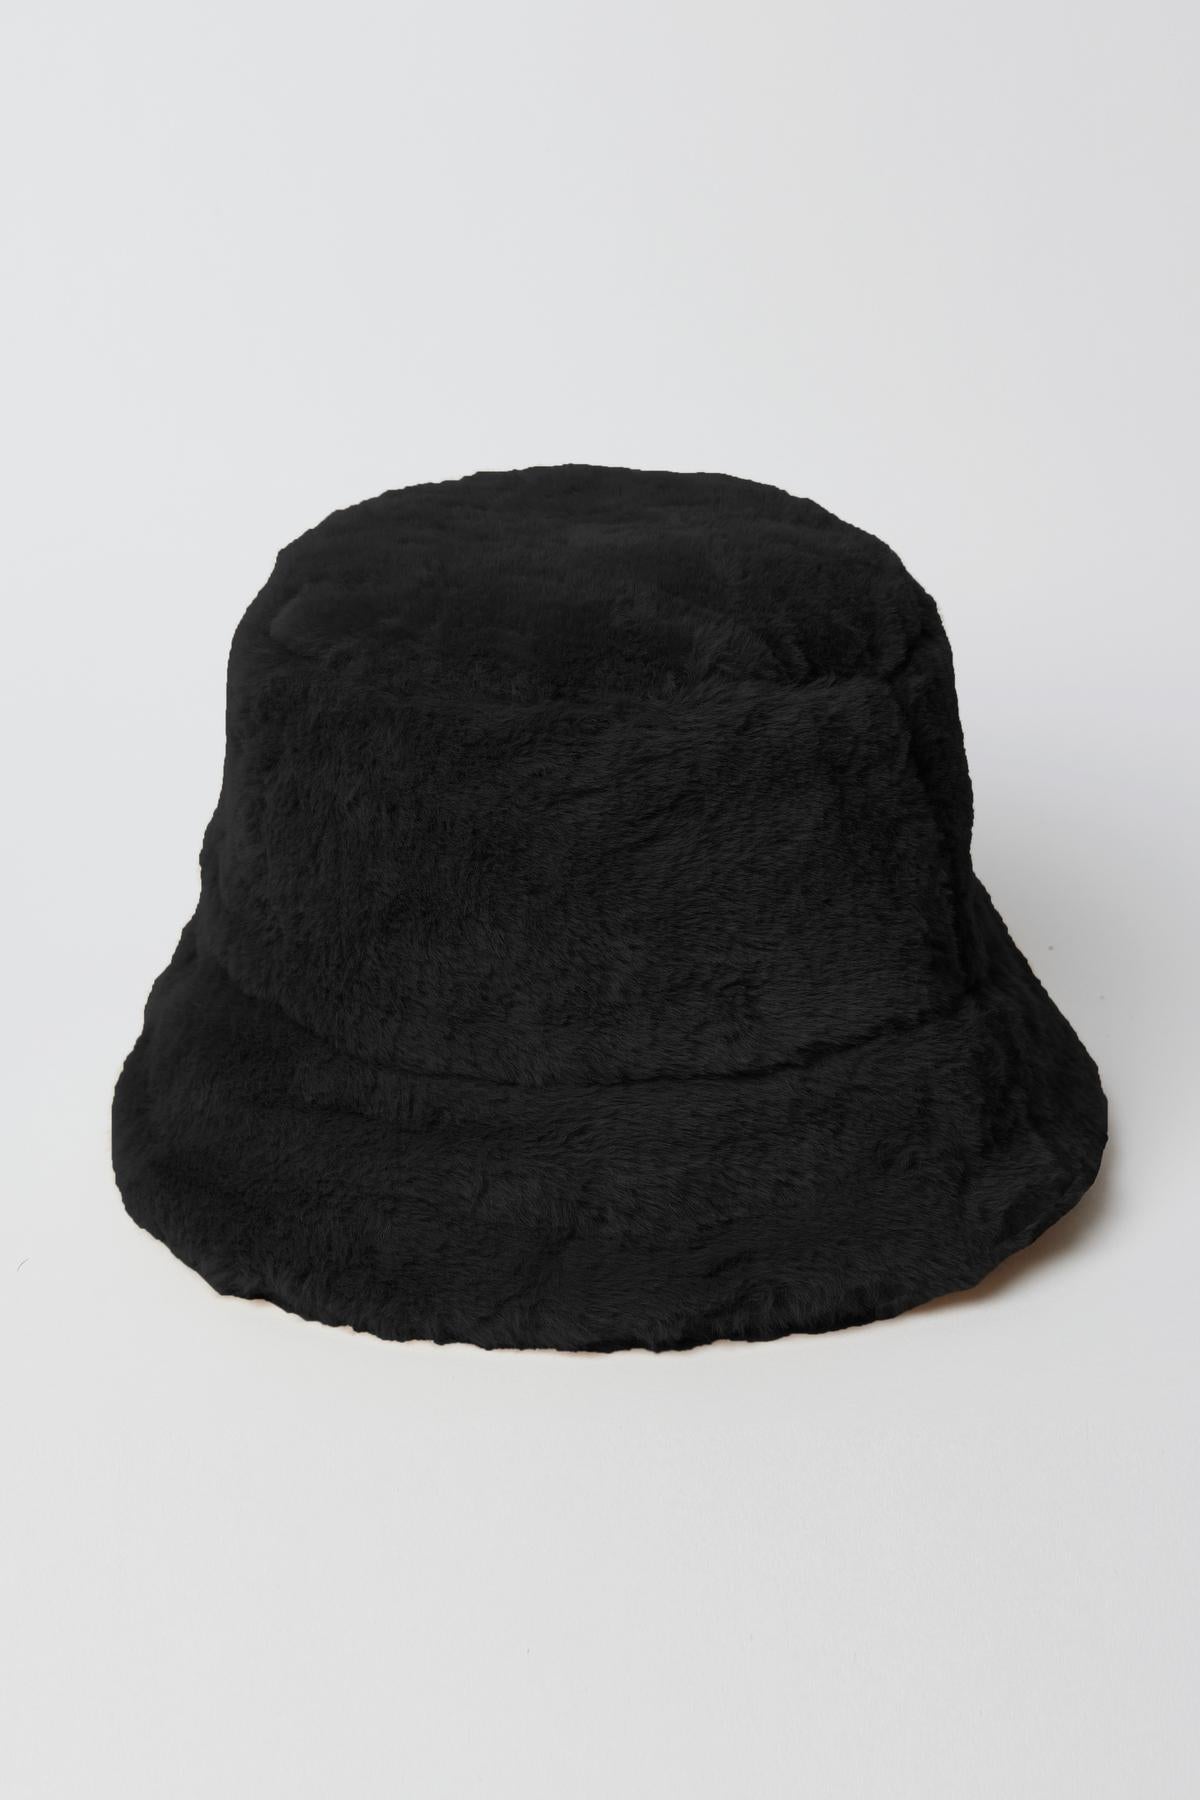 A chic Velvet by Graham & Spencer FAUX FUR BUCKET HAT on a white surface.-35211049763009